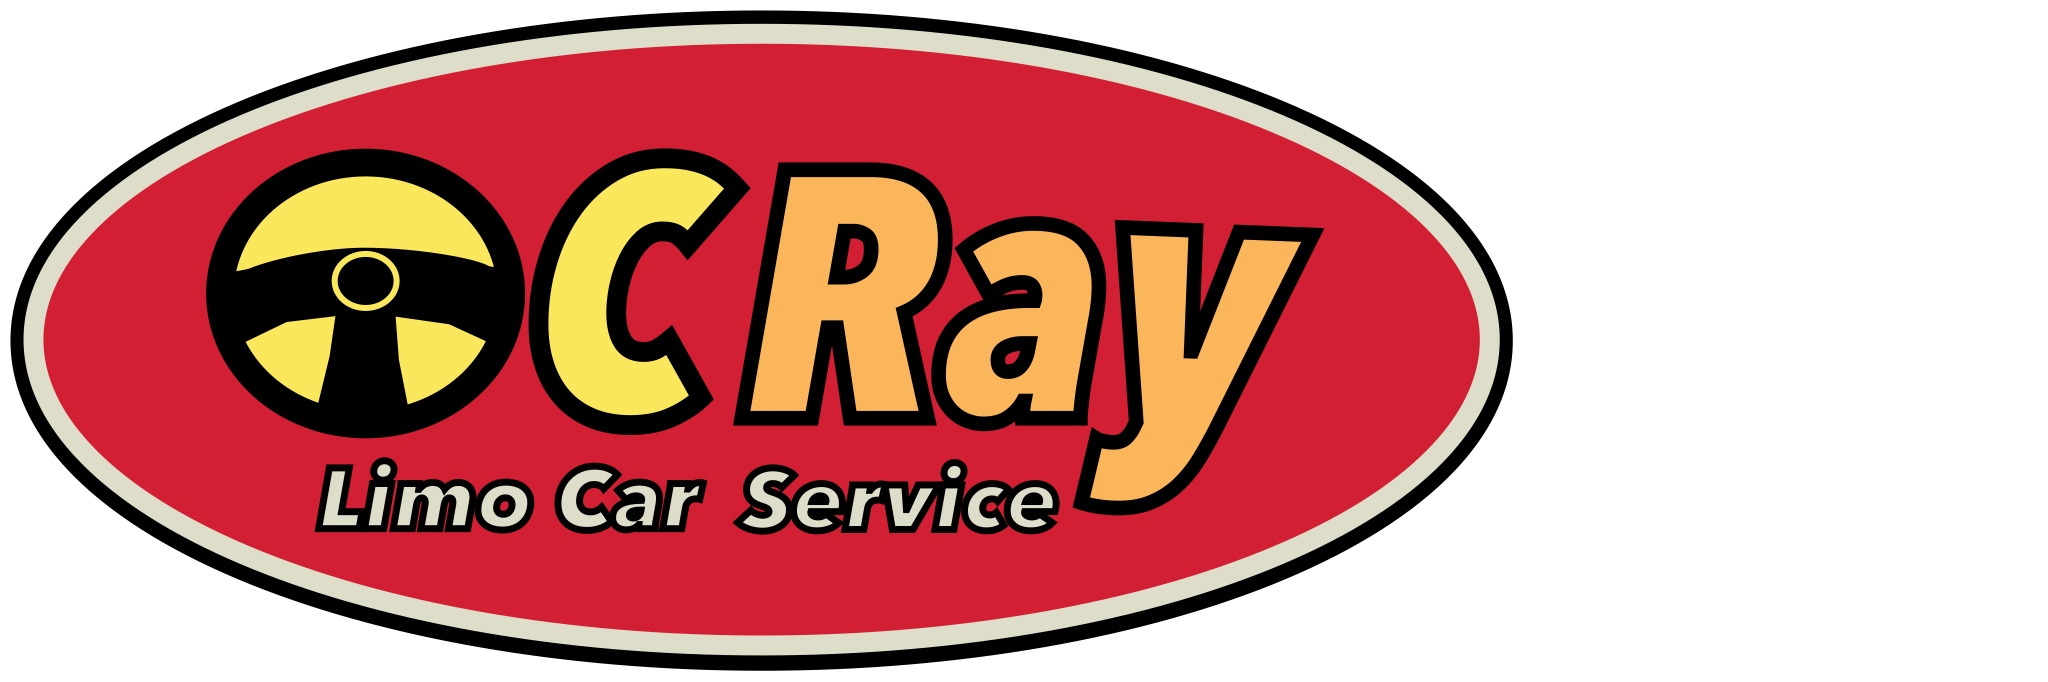 Welcome to OC Ray Limo Car Service